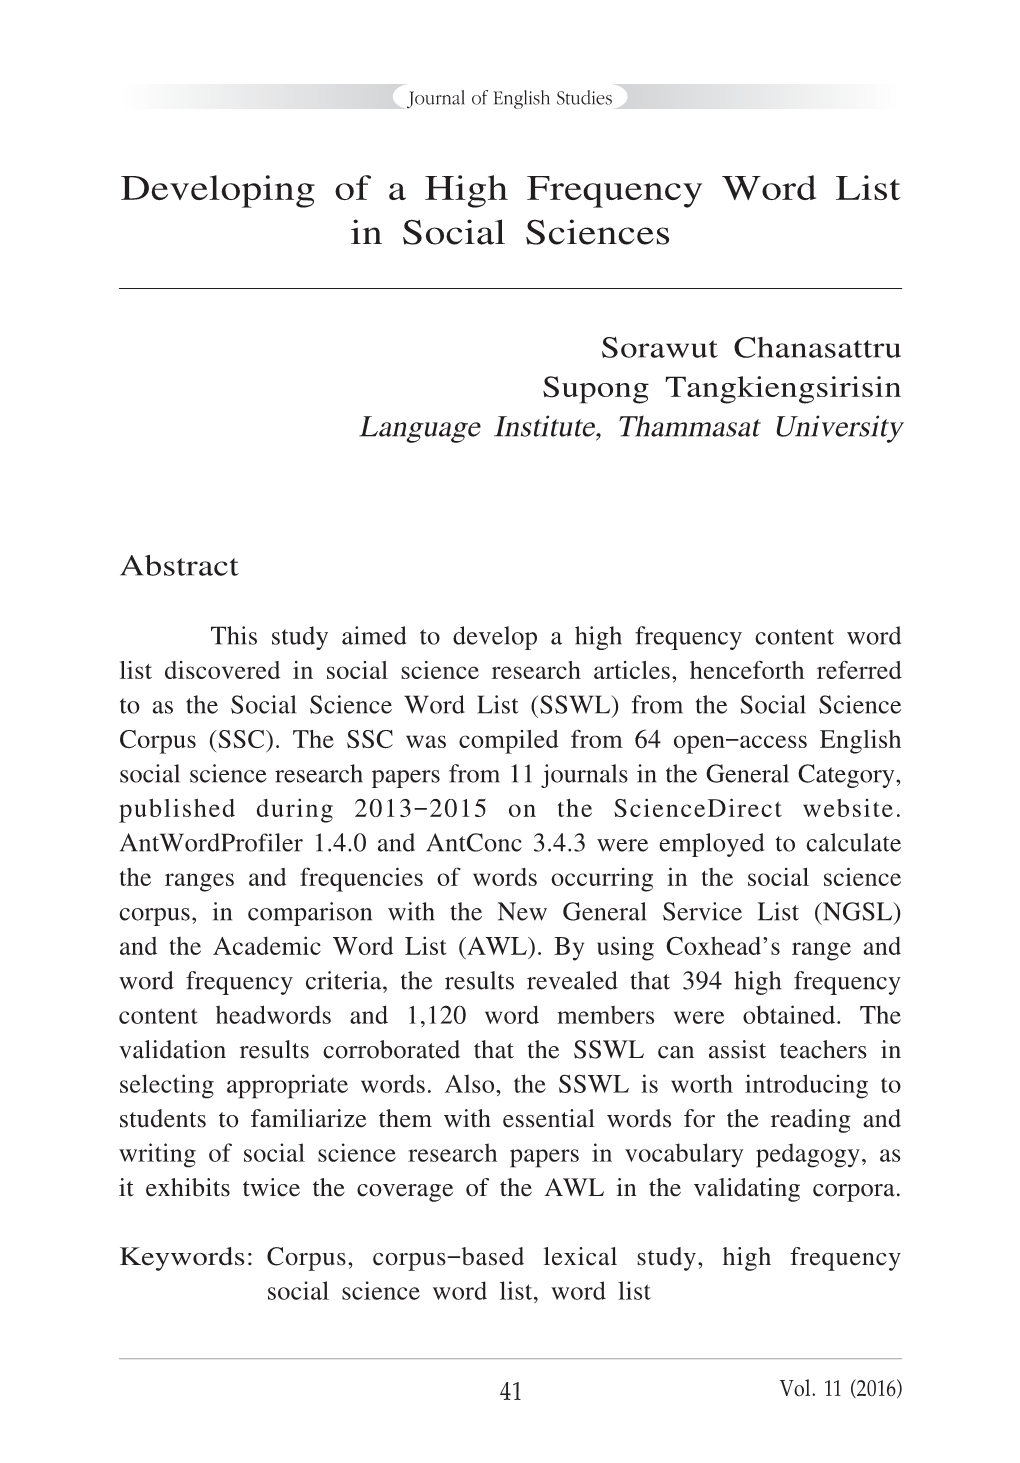 Developing of a High Frequency Word List in Social Sciences